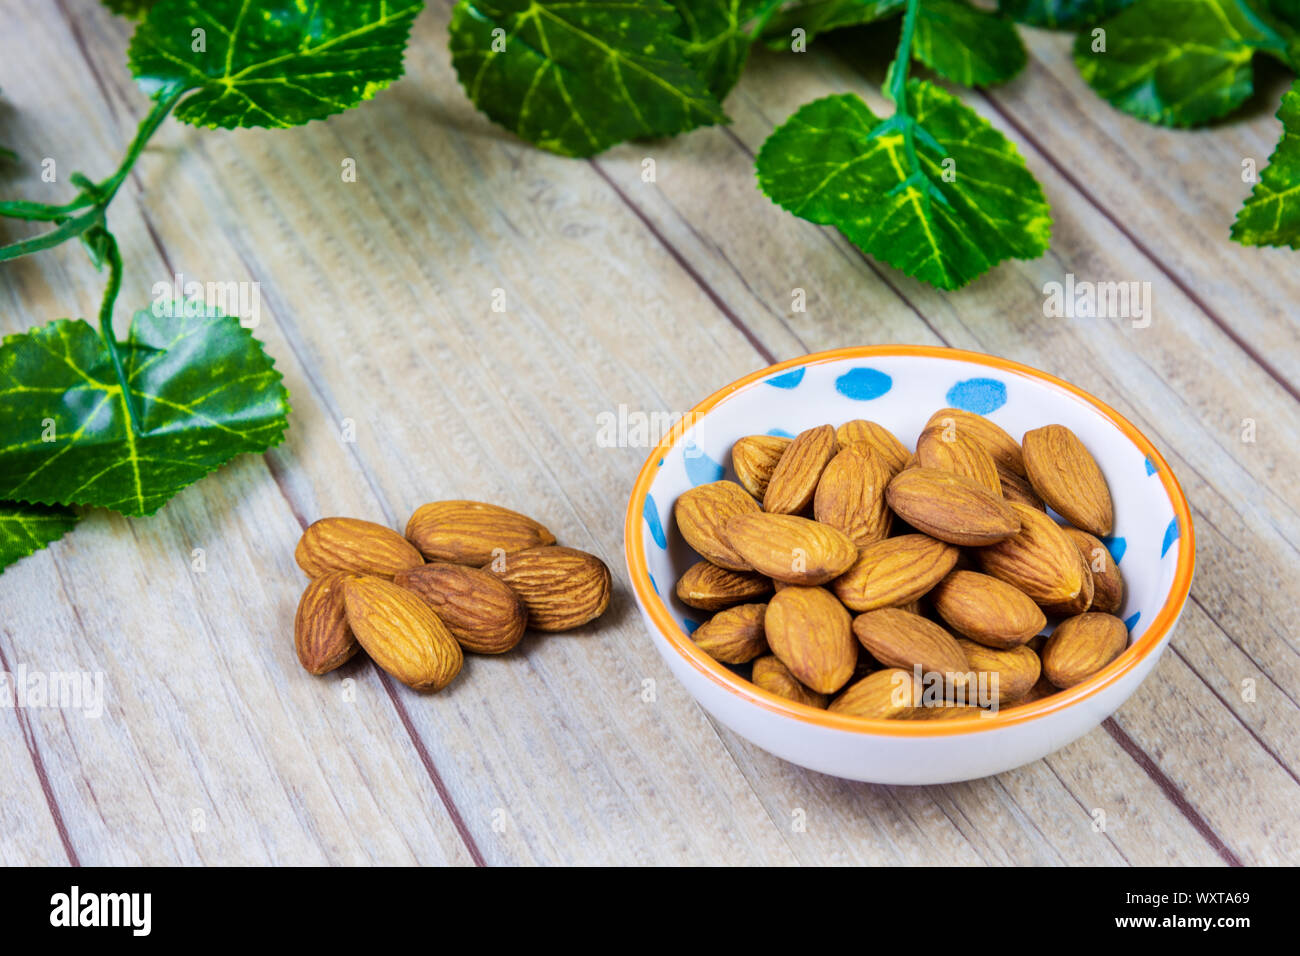 Almonds in a Bowl on a Wooden Background Stock Photo